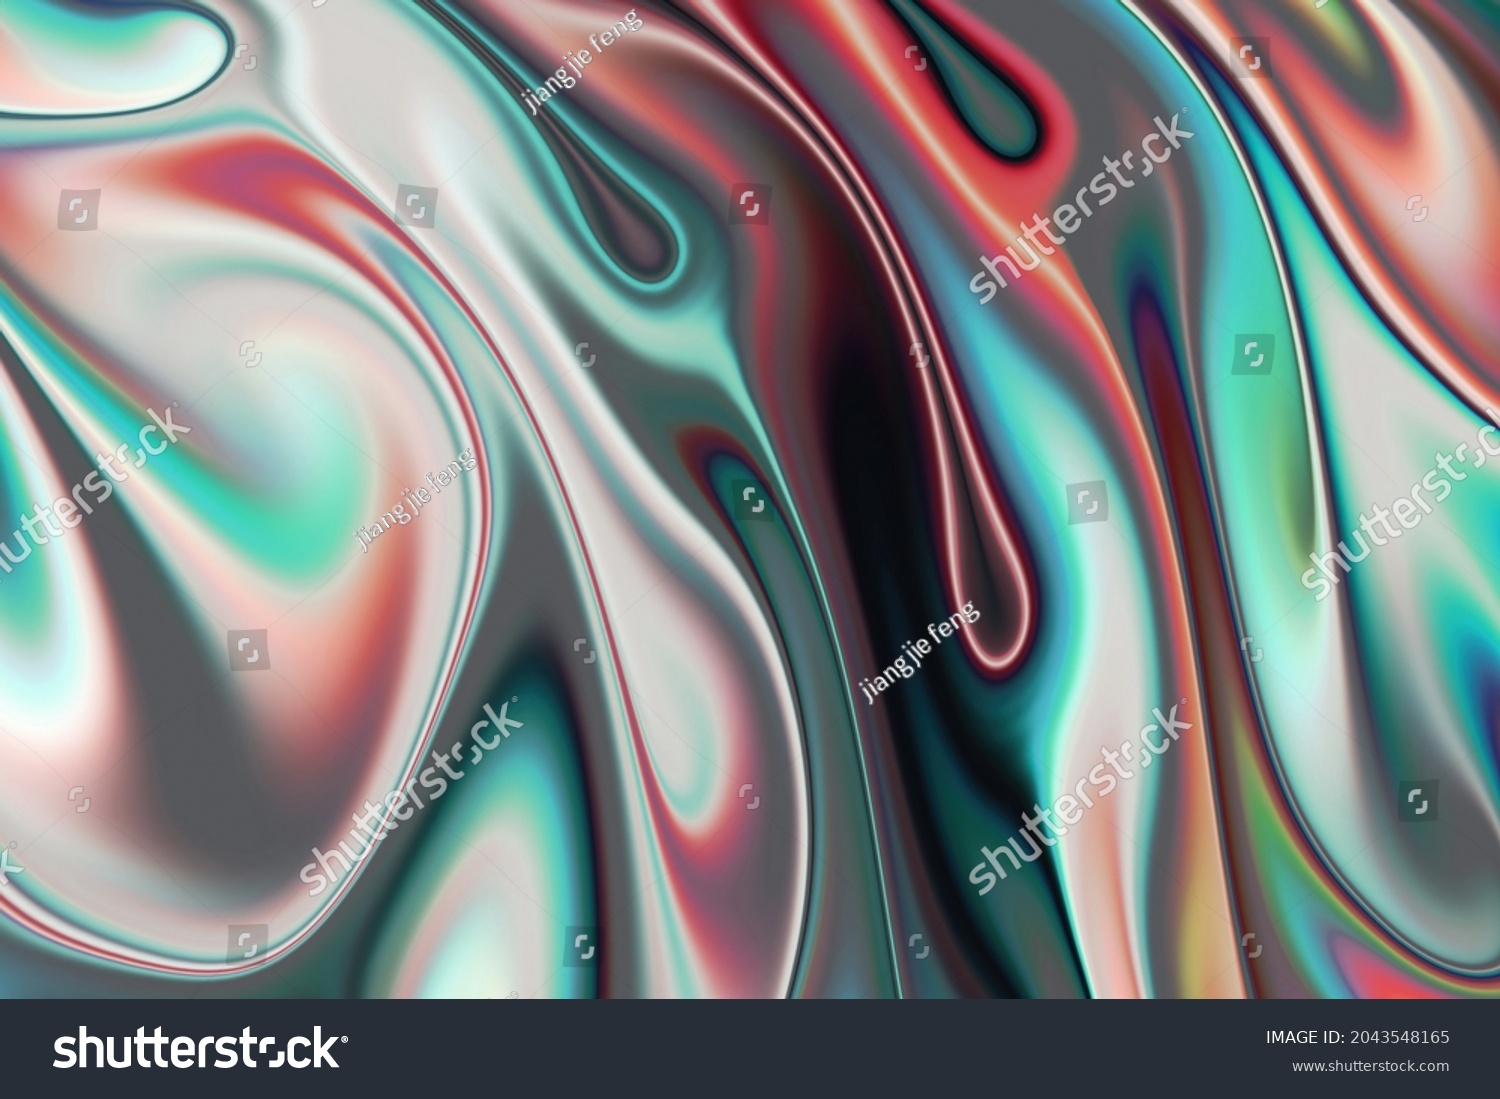 3d rendering Curve Dynamic Fluid Liquid Wallpaper. Light Pastel Cold Color Colorful Swirl Gradient Mesh. Bright Pink Vivid Vibrant Smooth Surface. Blurred Water Multicolor Neon Sky Gradient Background #2043548165